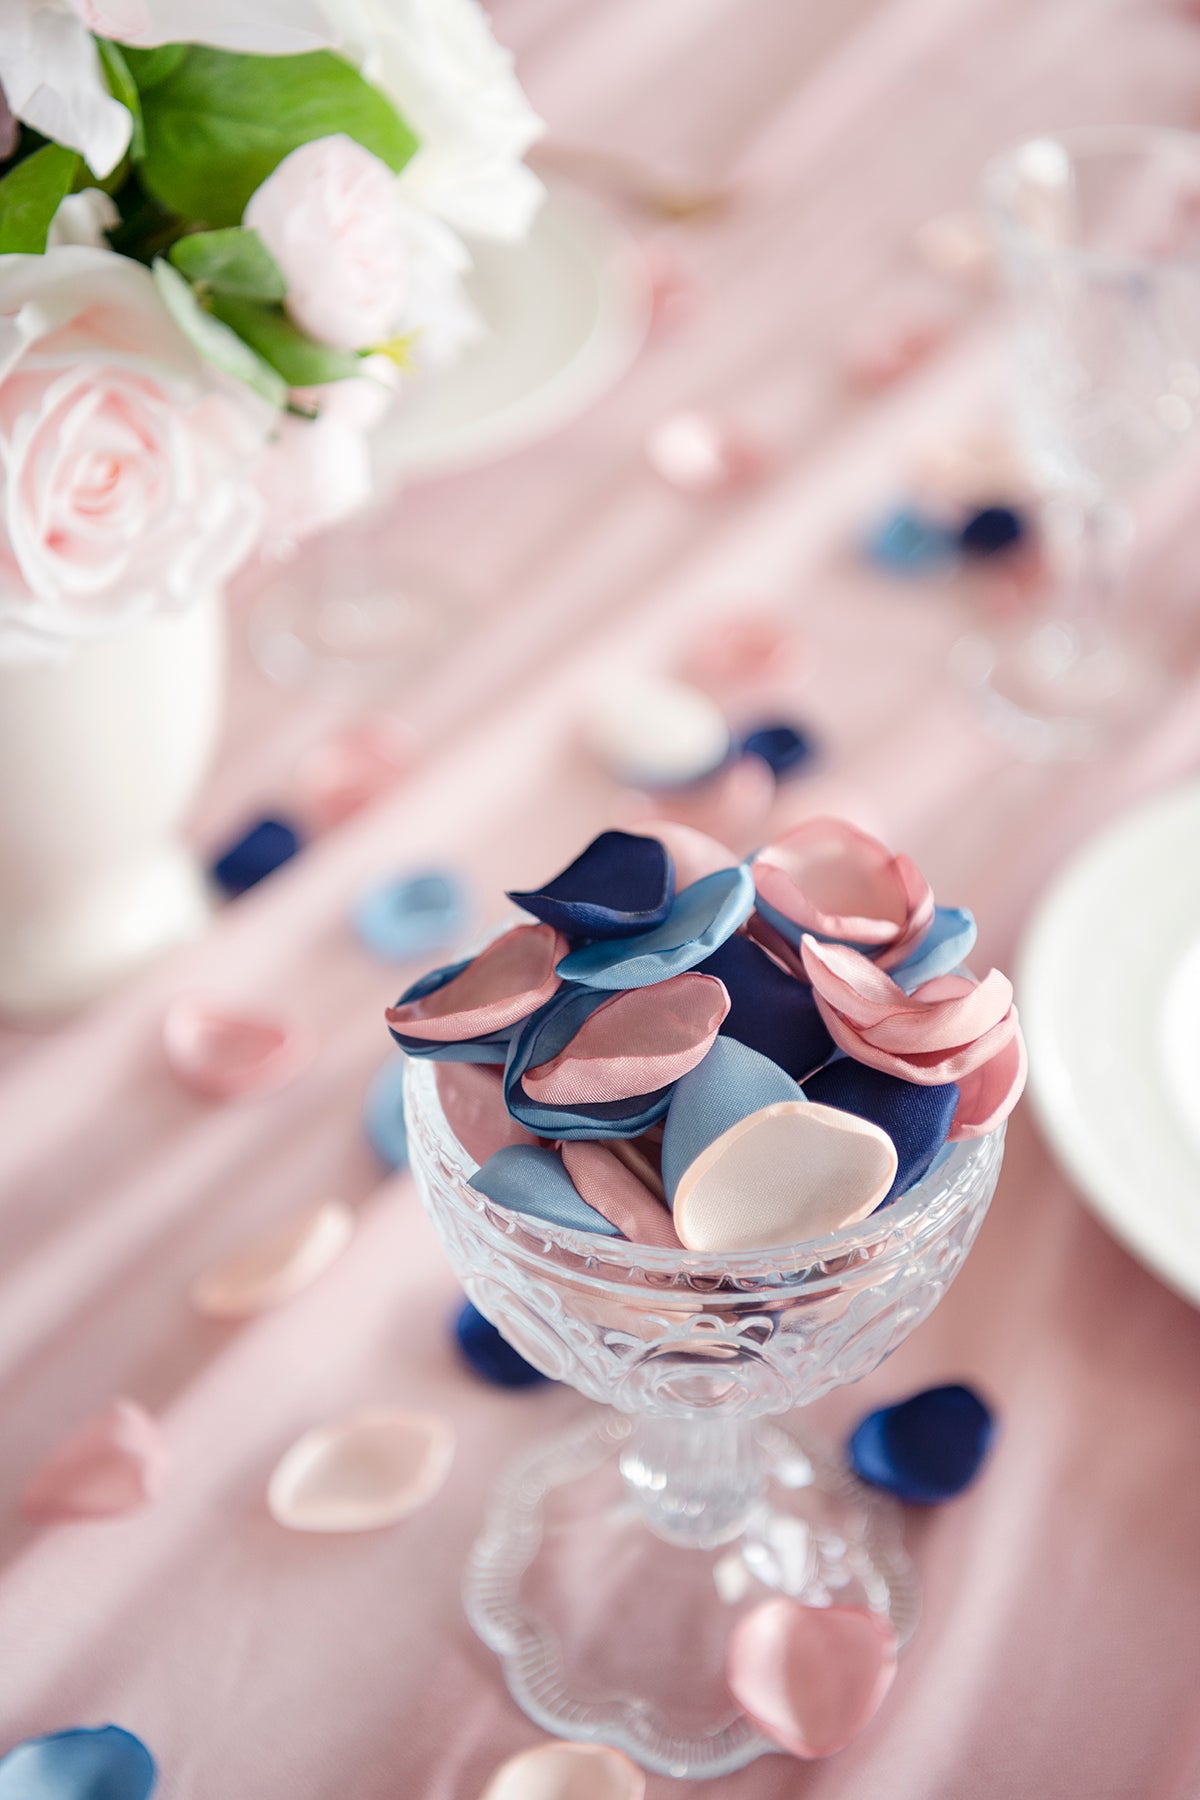 Additional Flower Decorations in Dusty Rose & Navy